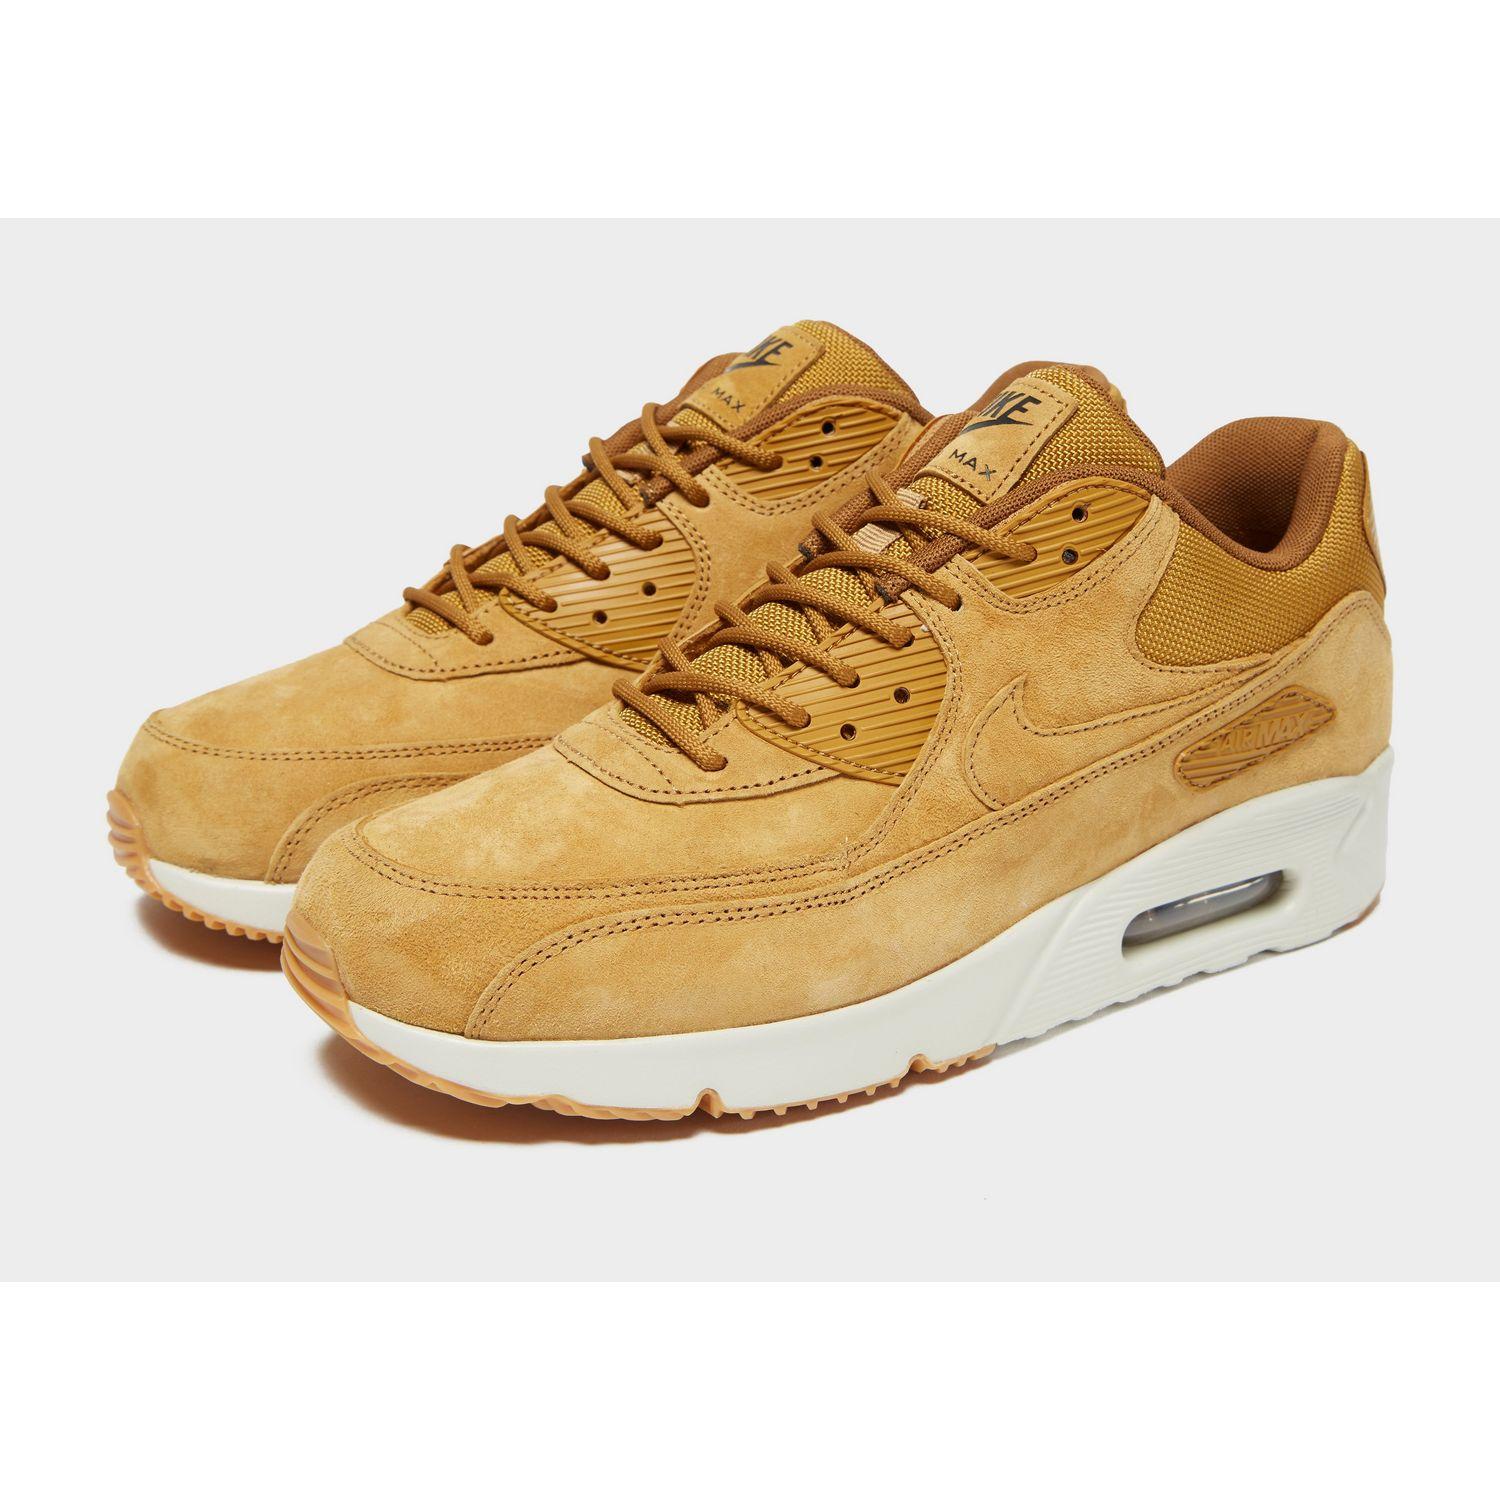 Nike Suede Air Max 90 Ultra 2.0 in Brown/White (Brown) for Men - Lyst